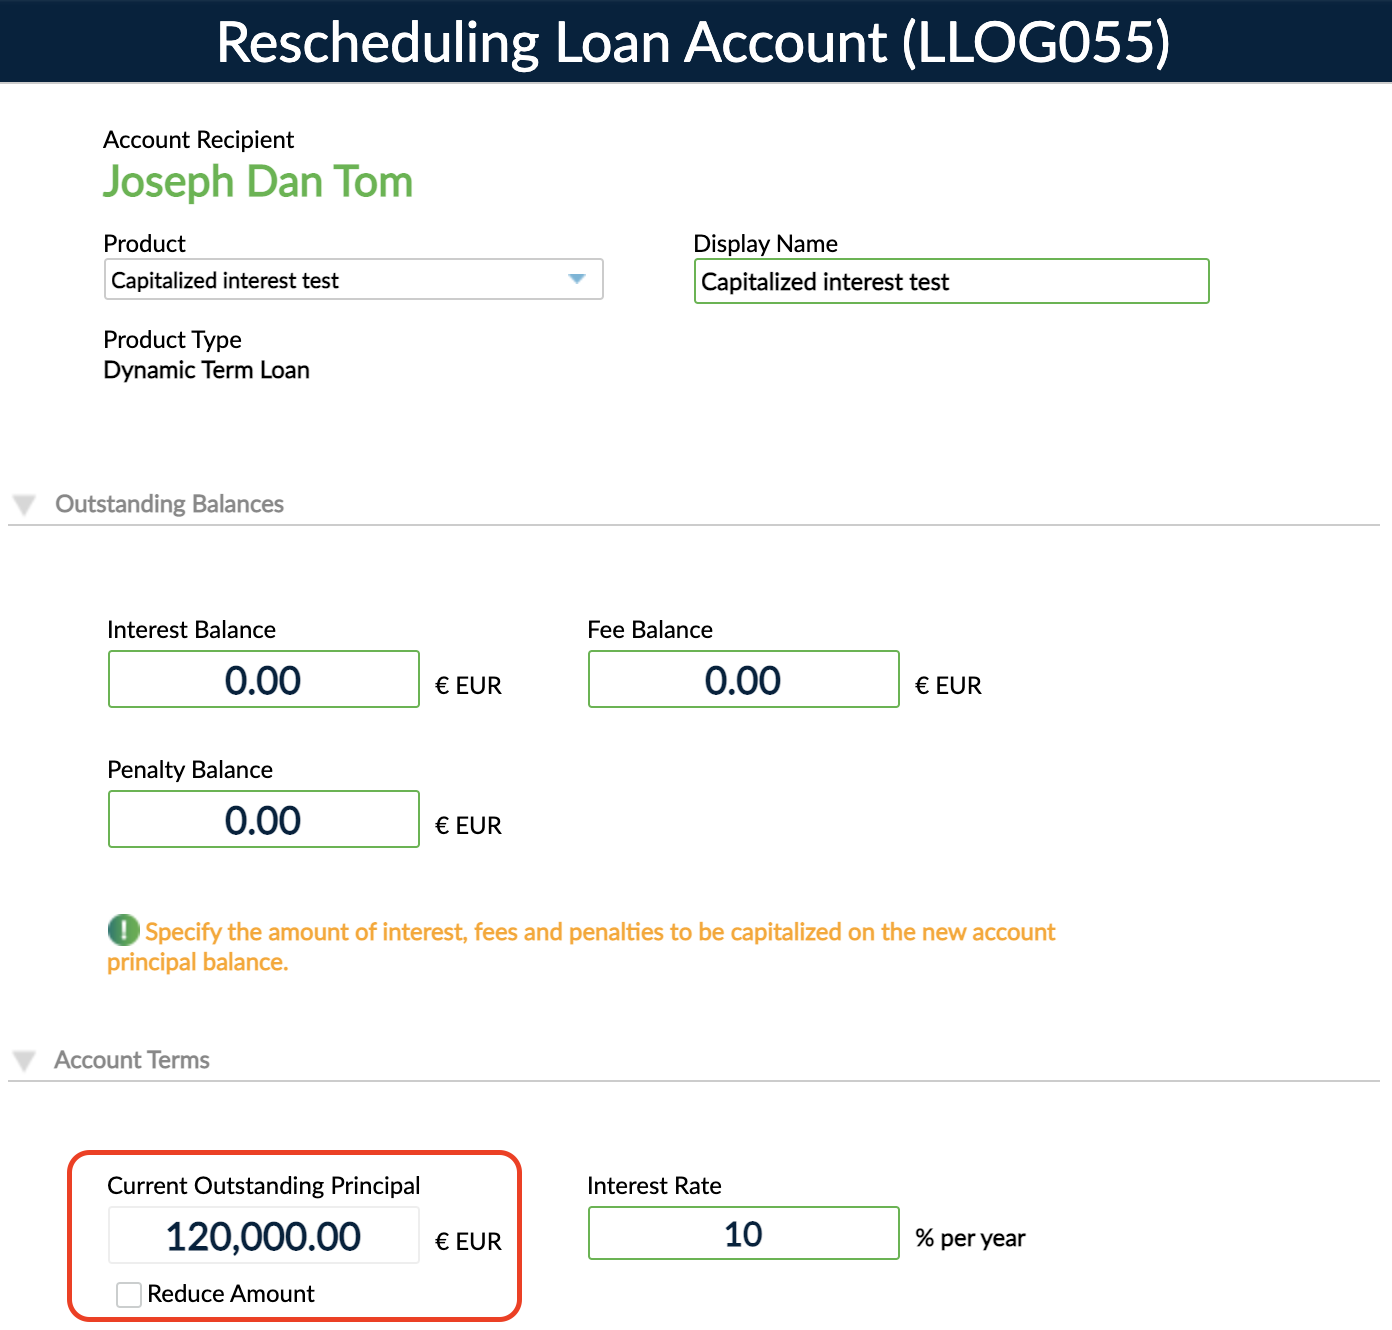 Rescheduling loans form with focus on the current outstanding amount and the option to reduce it